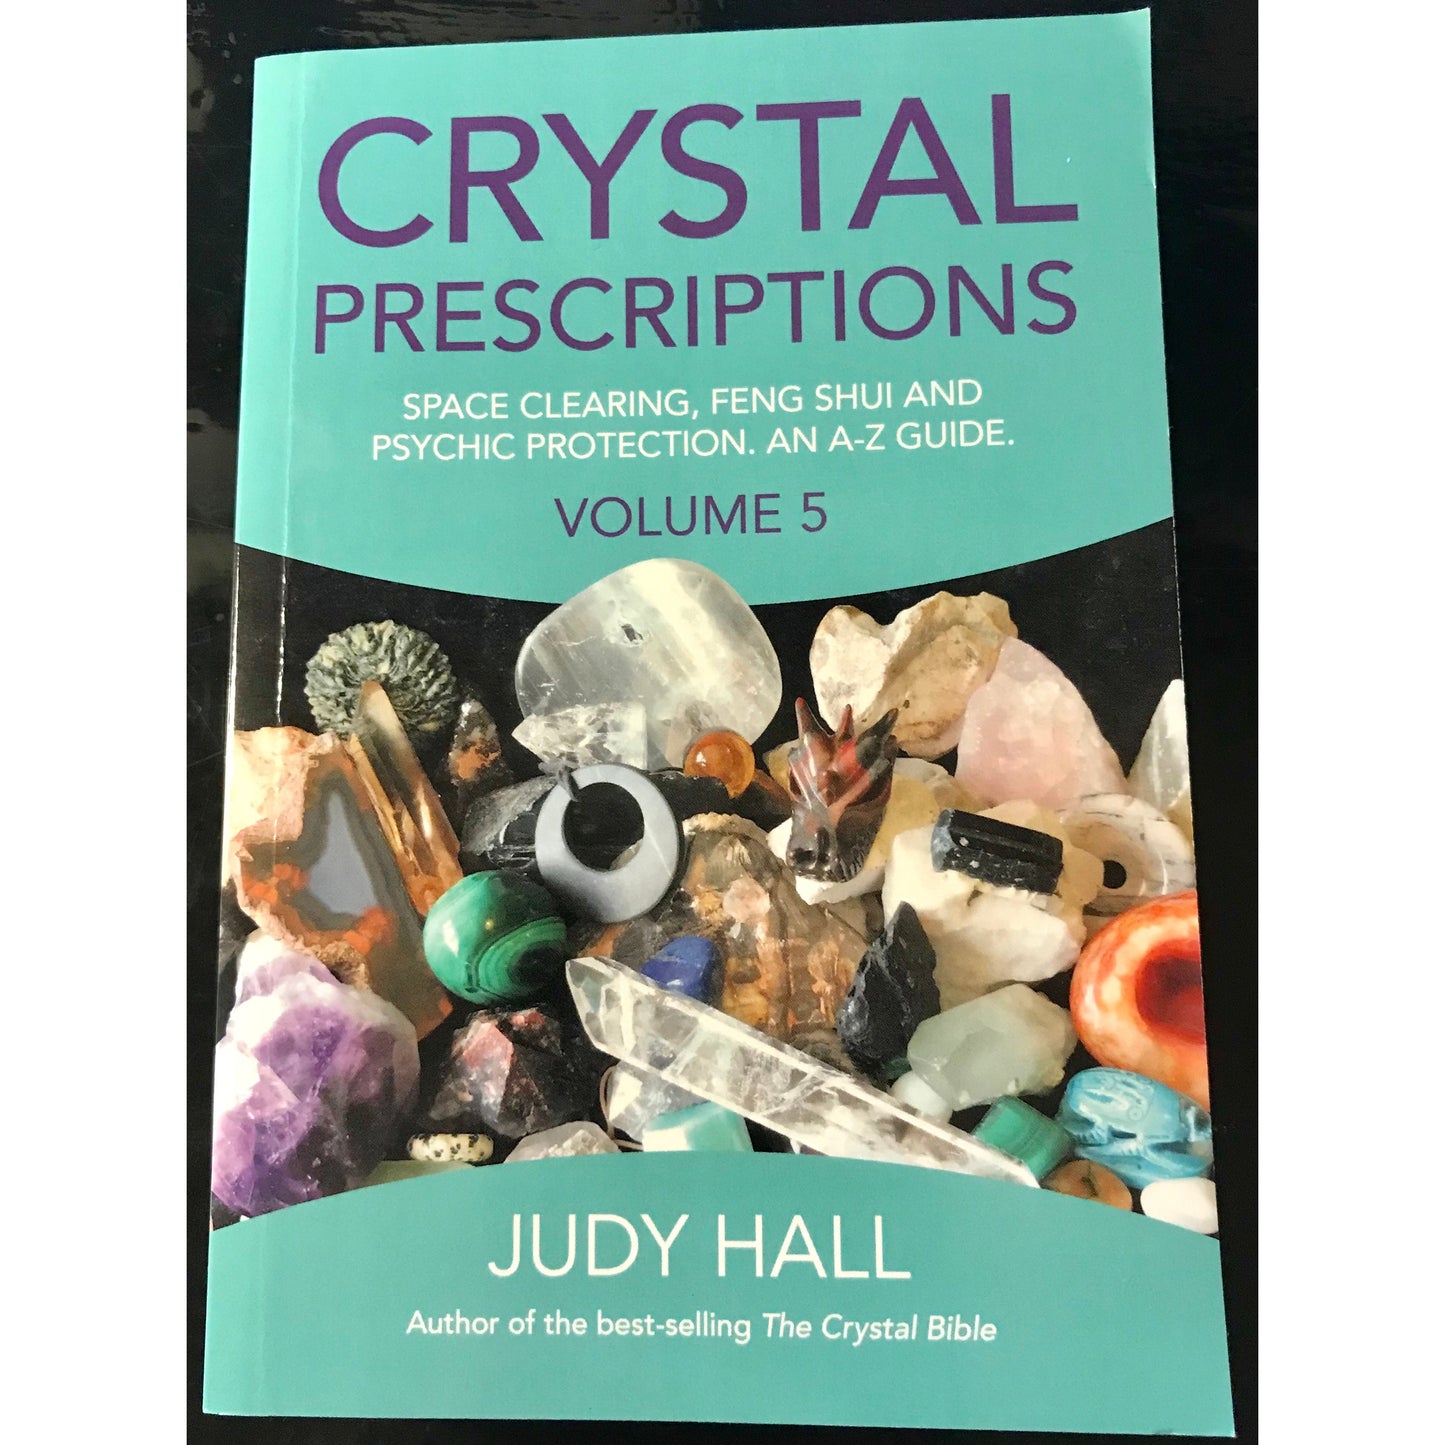 Crystal Prescriptions, Volume 5 by Best-Selling Author Judy Hall